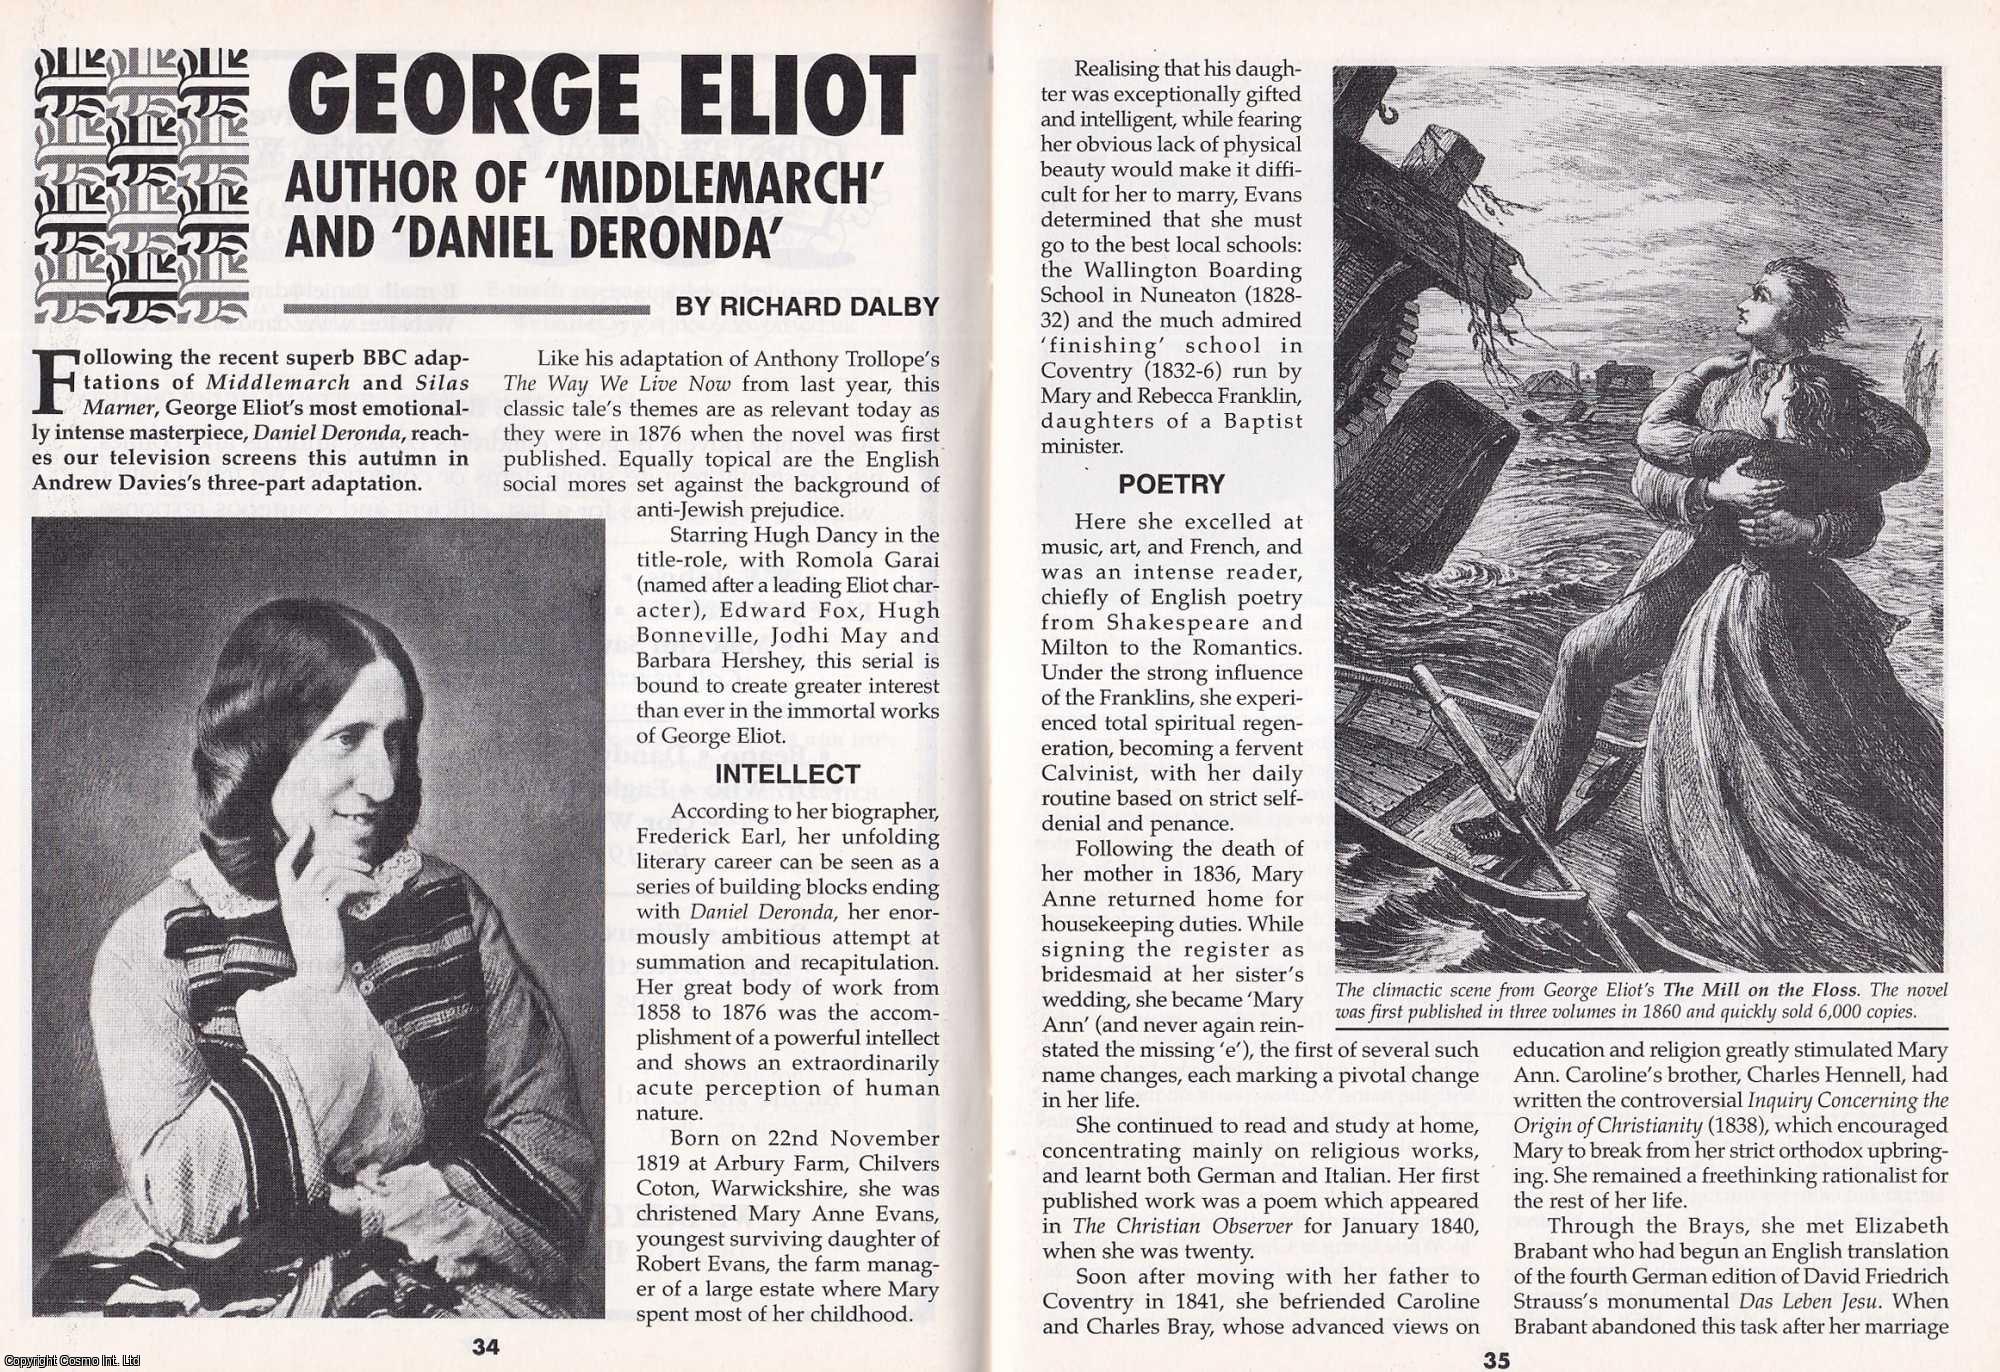 Richard Dalby - George Eliot. Author of Middlemarch. This is an original article separated from an issue of The Book & Magazine Collector publication.